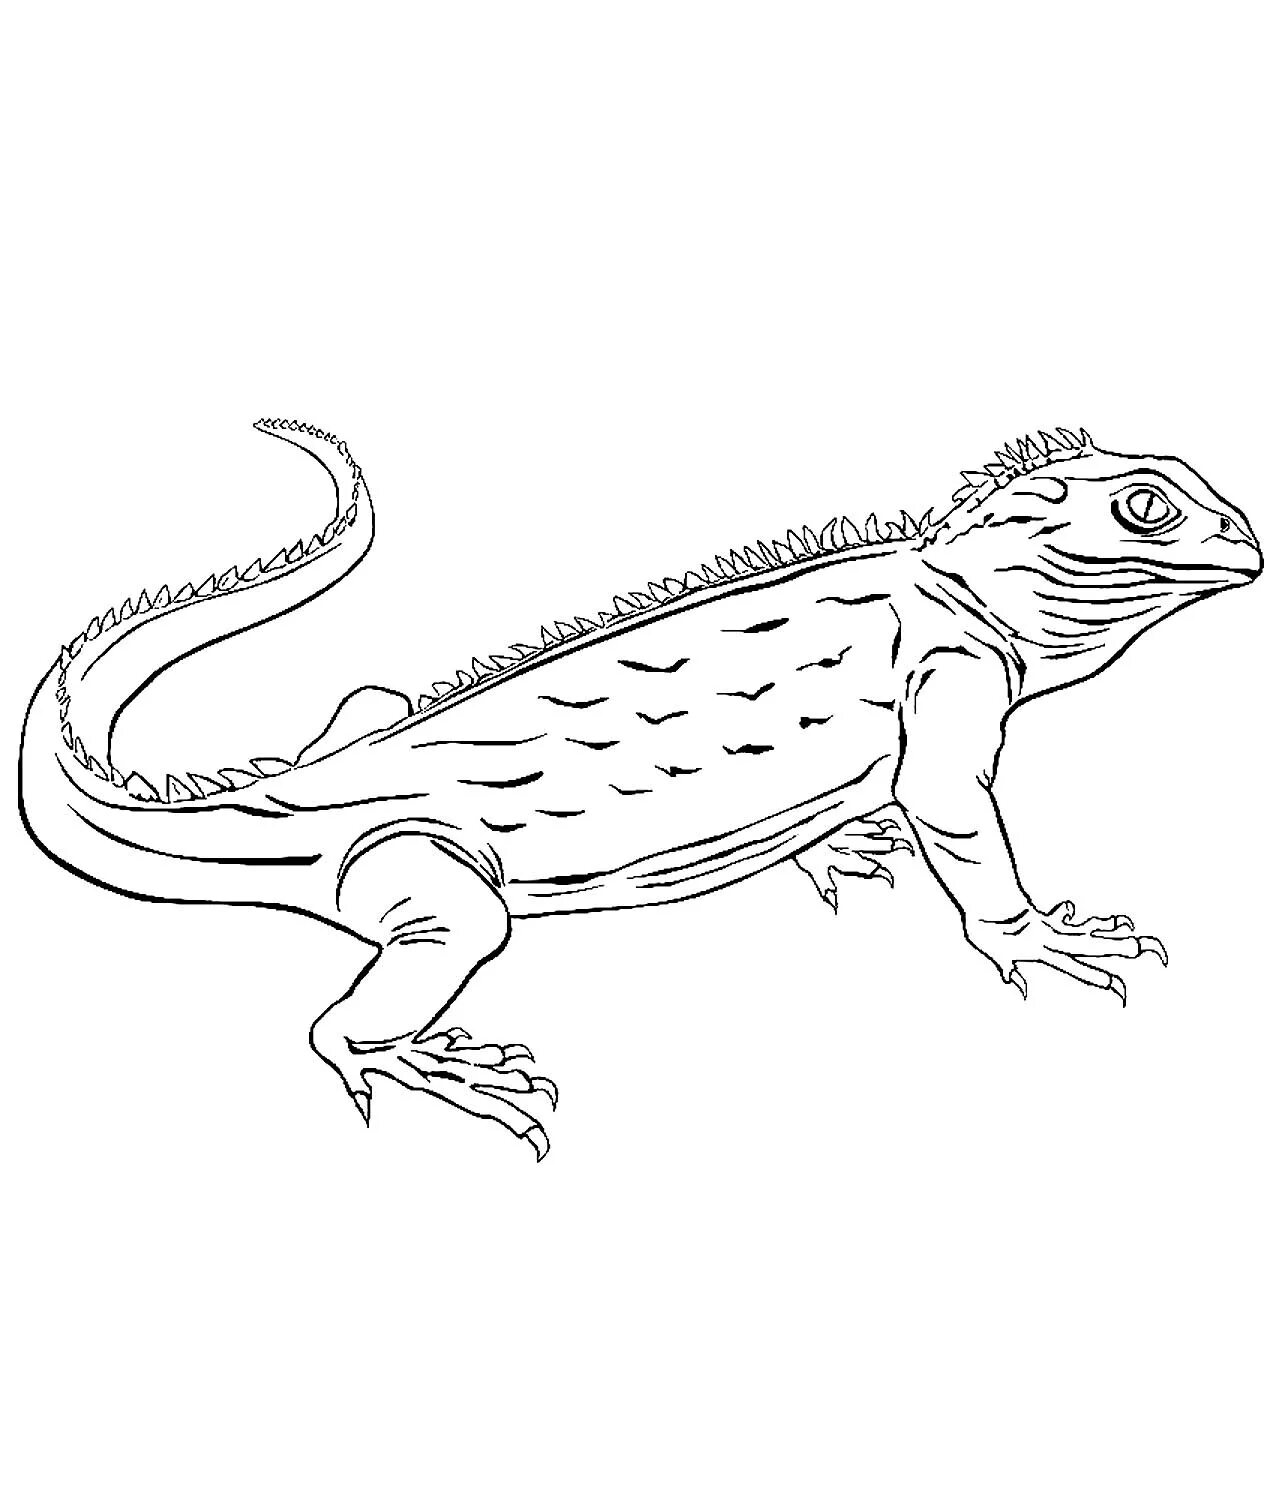 Majestic bearded dragon coloring page